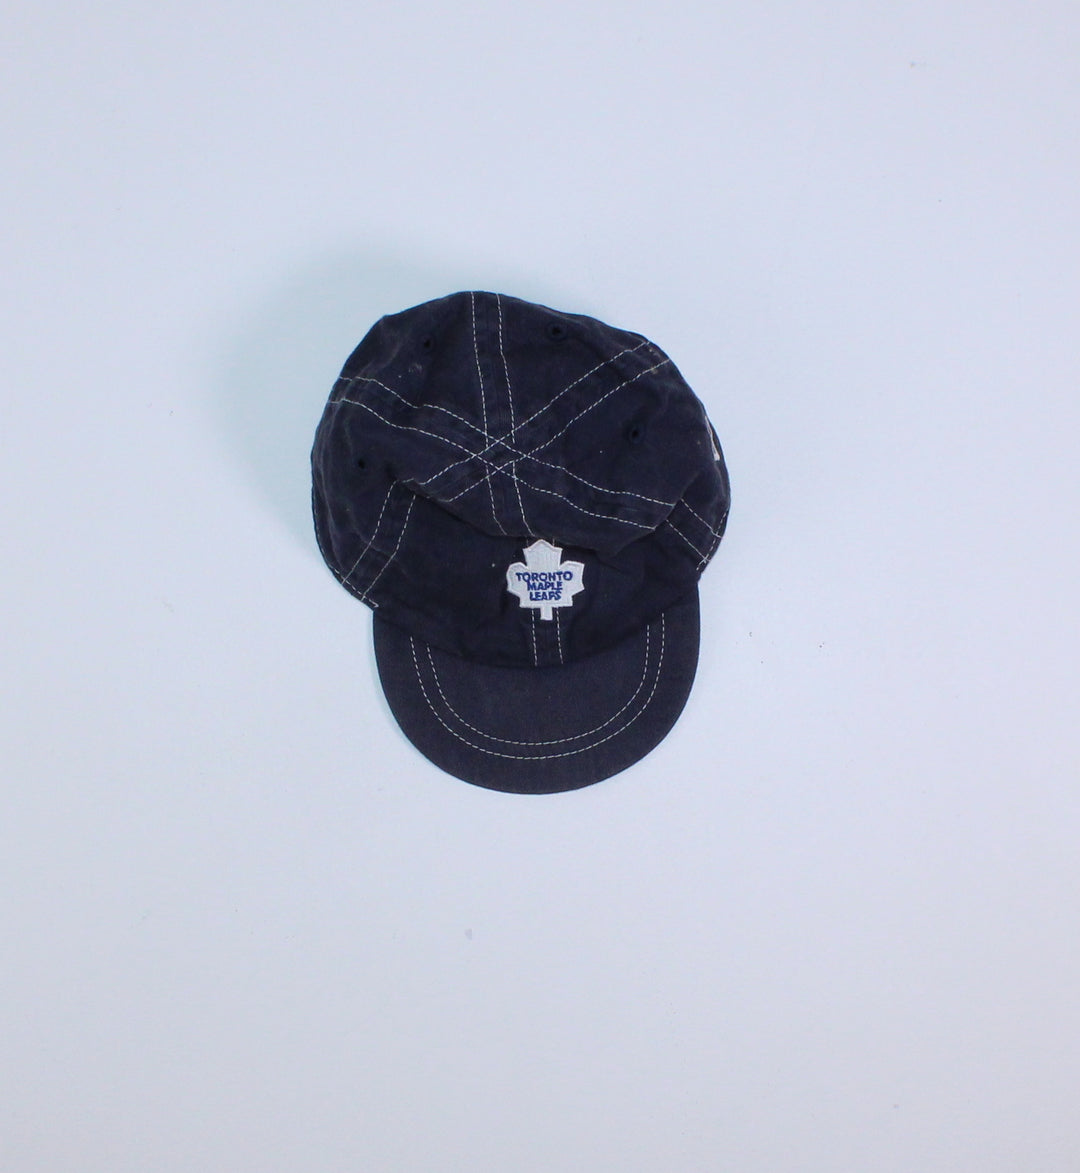 TORONTO MAPLE LEAFS HAT INFANT SIZE